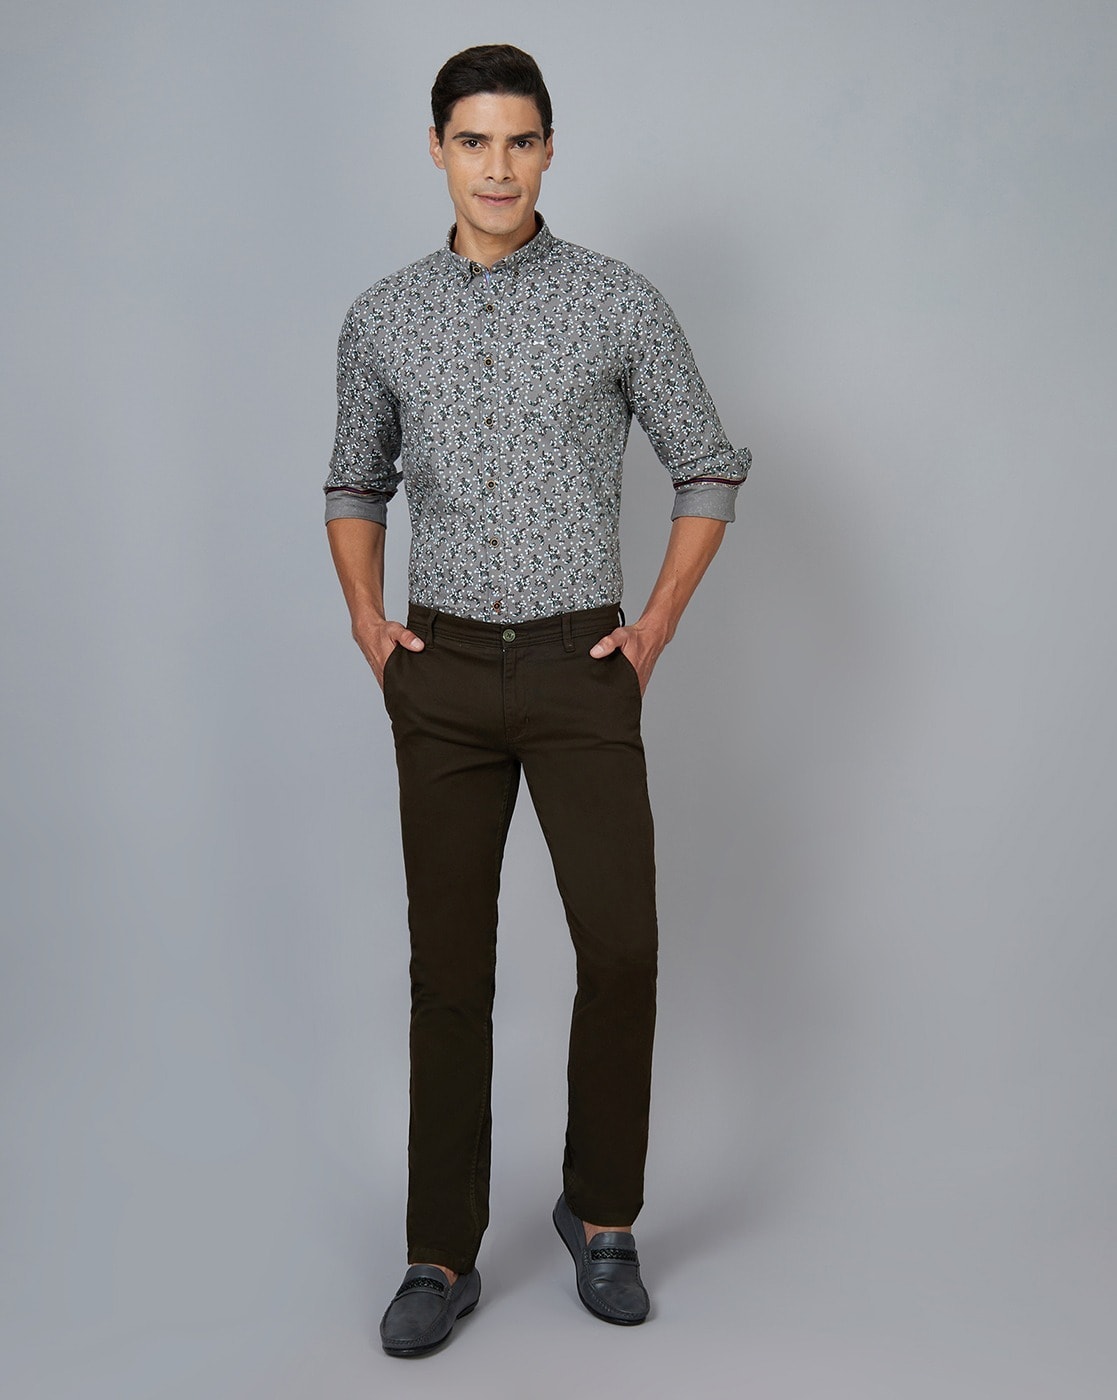 How to Match Your Shirt With Your Pants  Jared Lang Official Blog